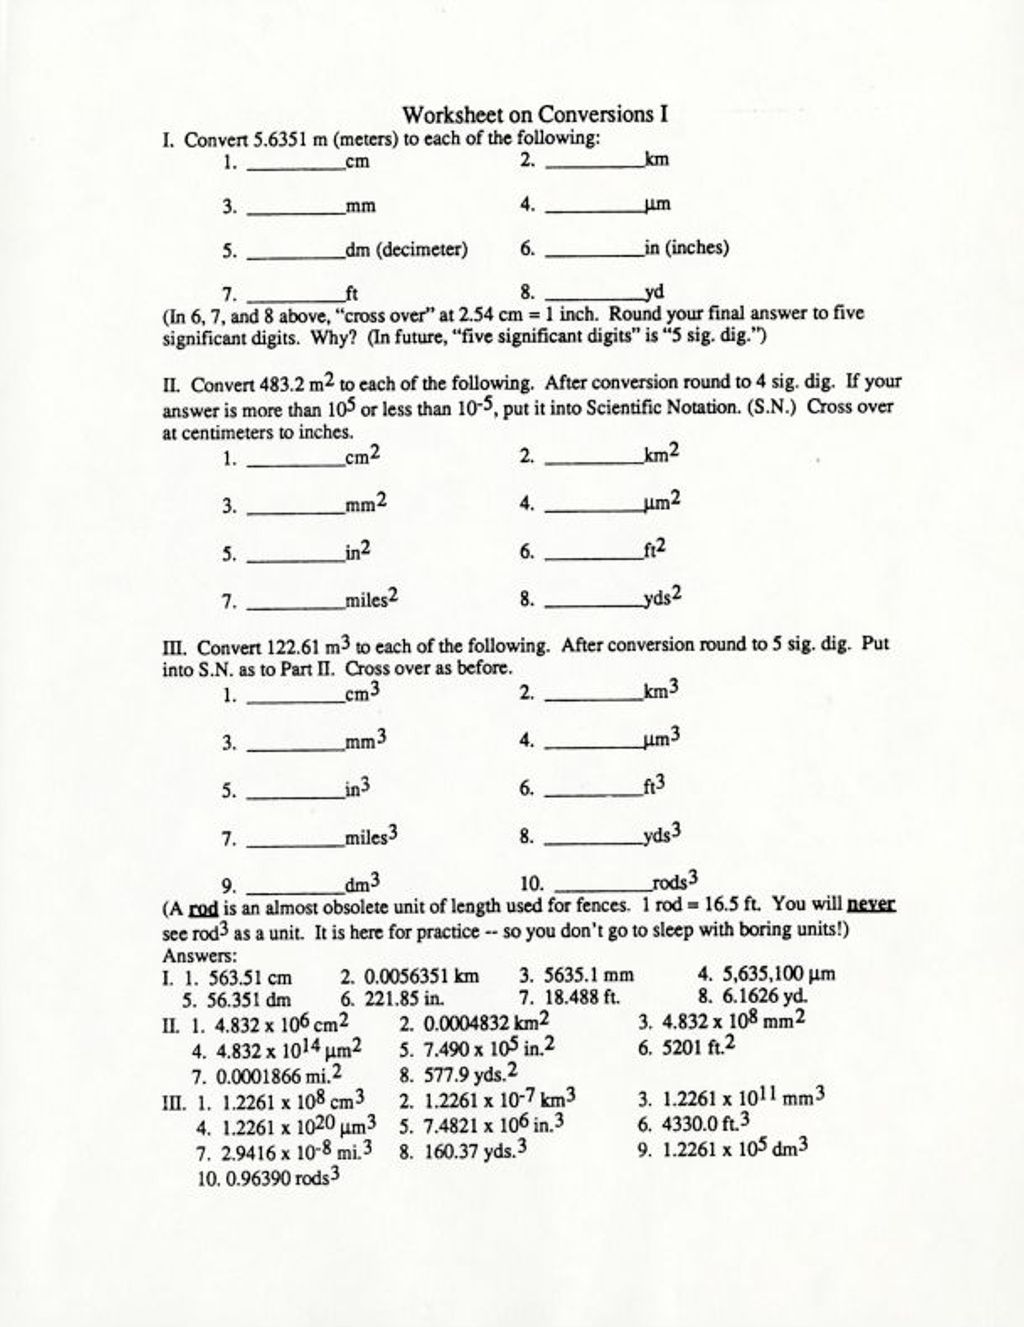 Miniature of Worksheet on Conversions I with AK